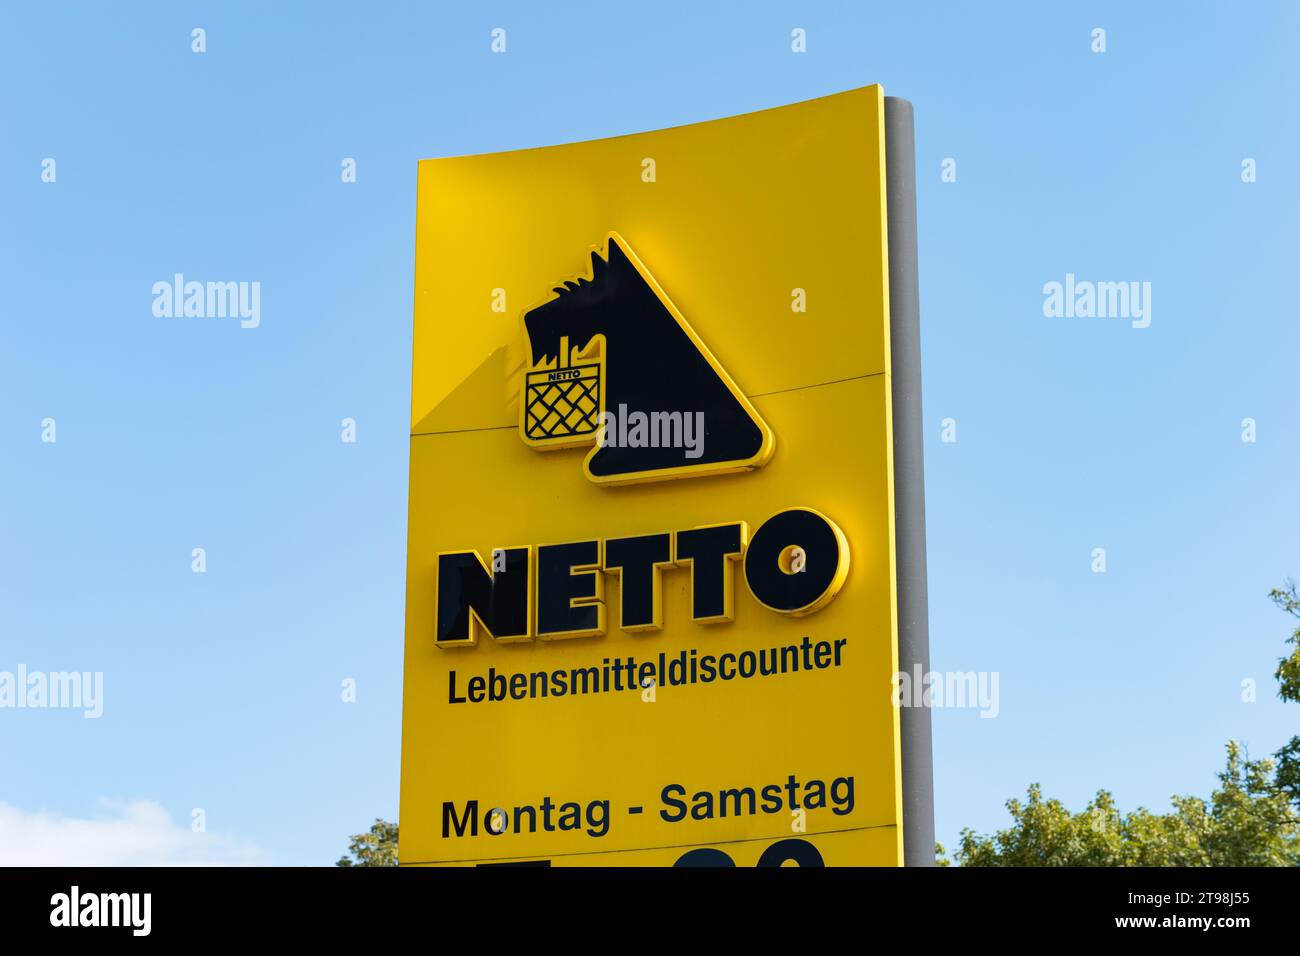 Netto Lebensmitteldiscounter (food discounter) sign. A black dog with a shopping basket is part of the logo. The grocery stores are located in Germany Stock Photo